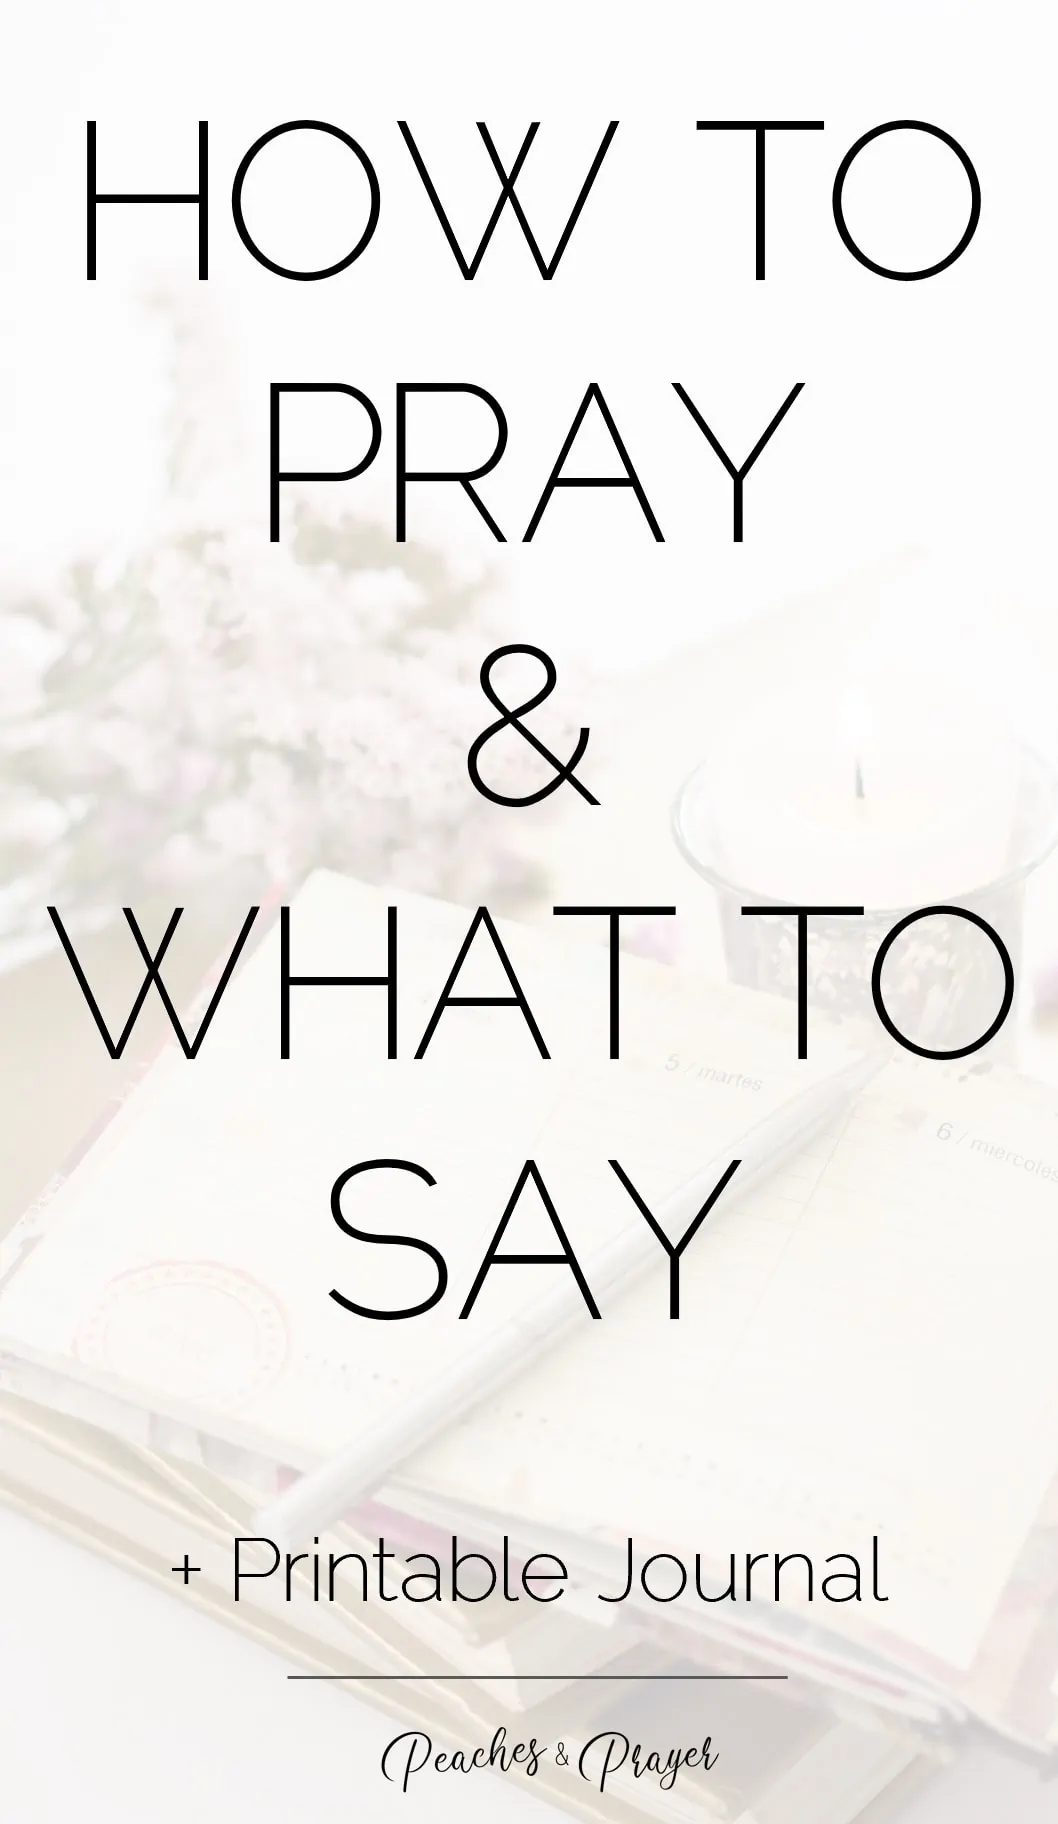 How To Pray & What To Say {The Prayer Series}